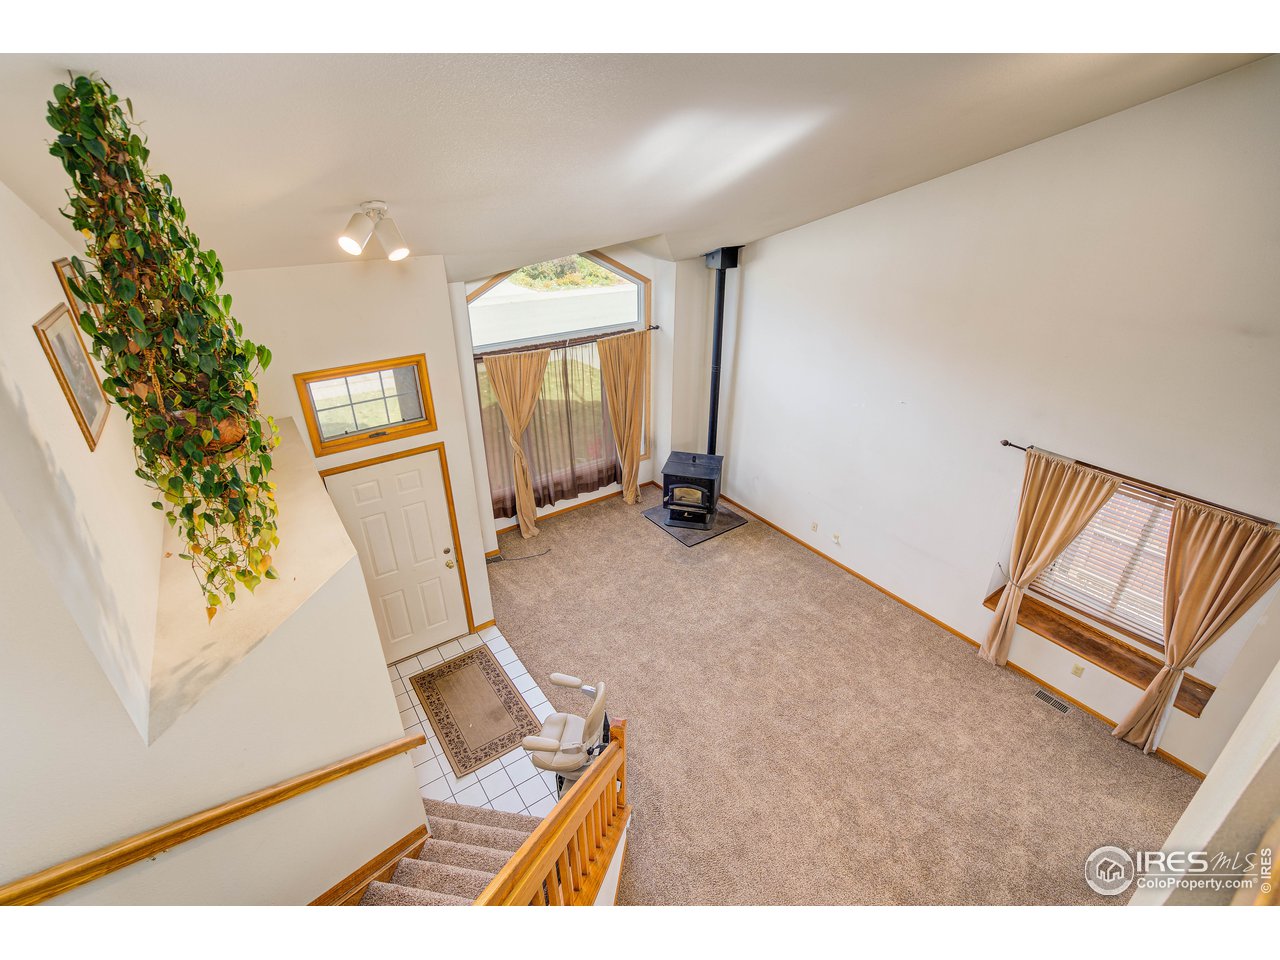 Check out those vaulted ceilings! 